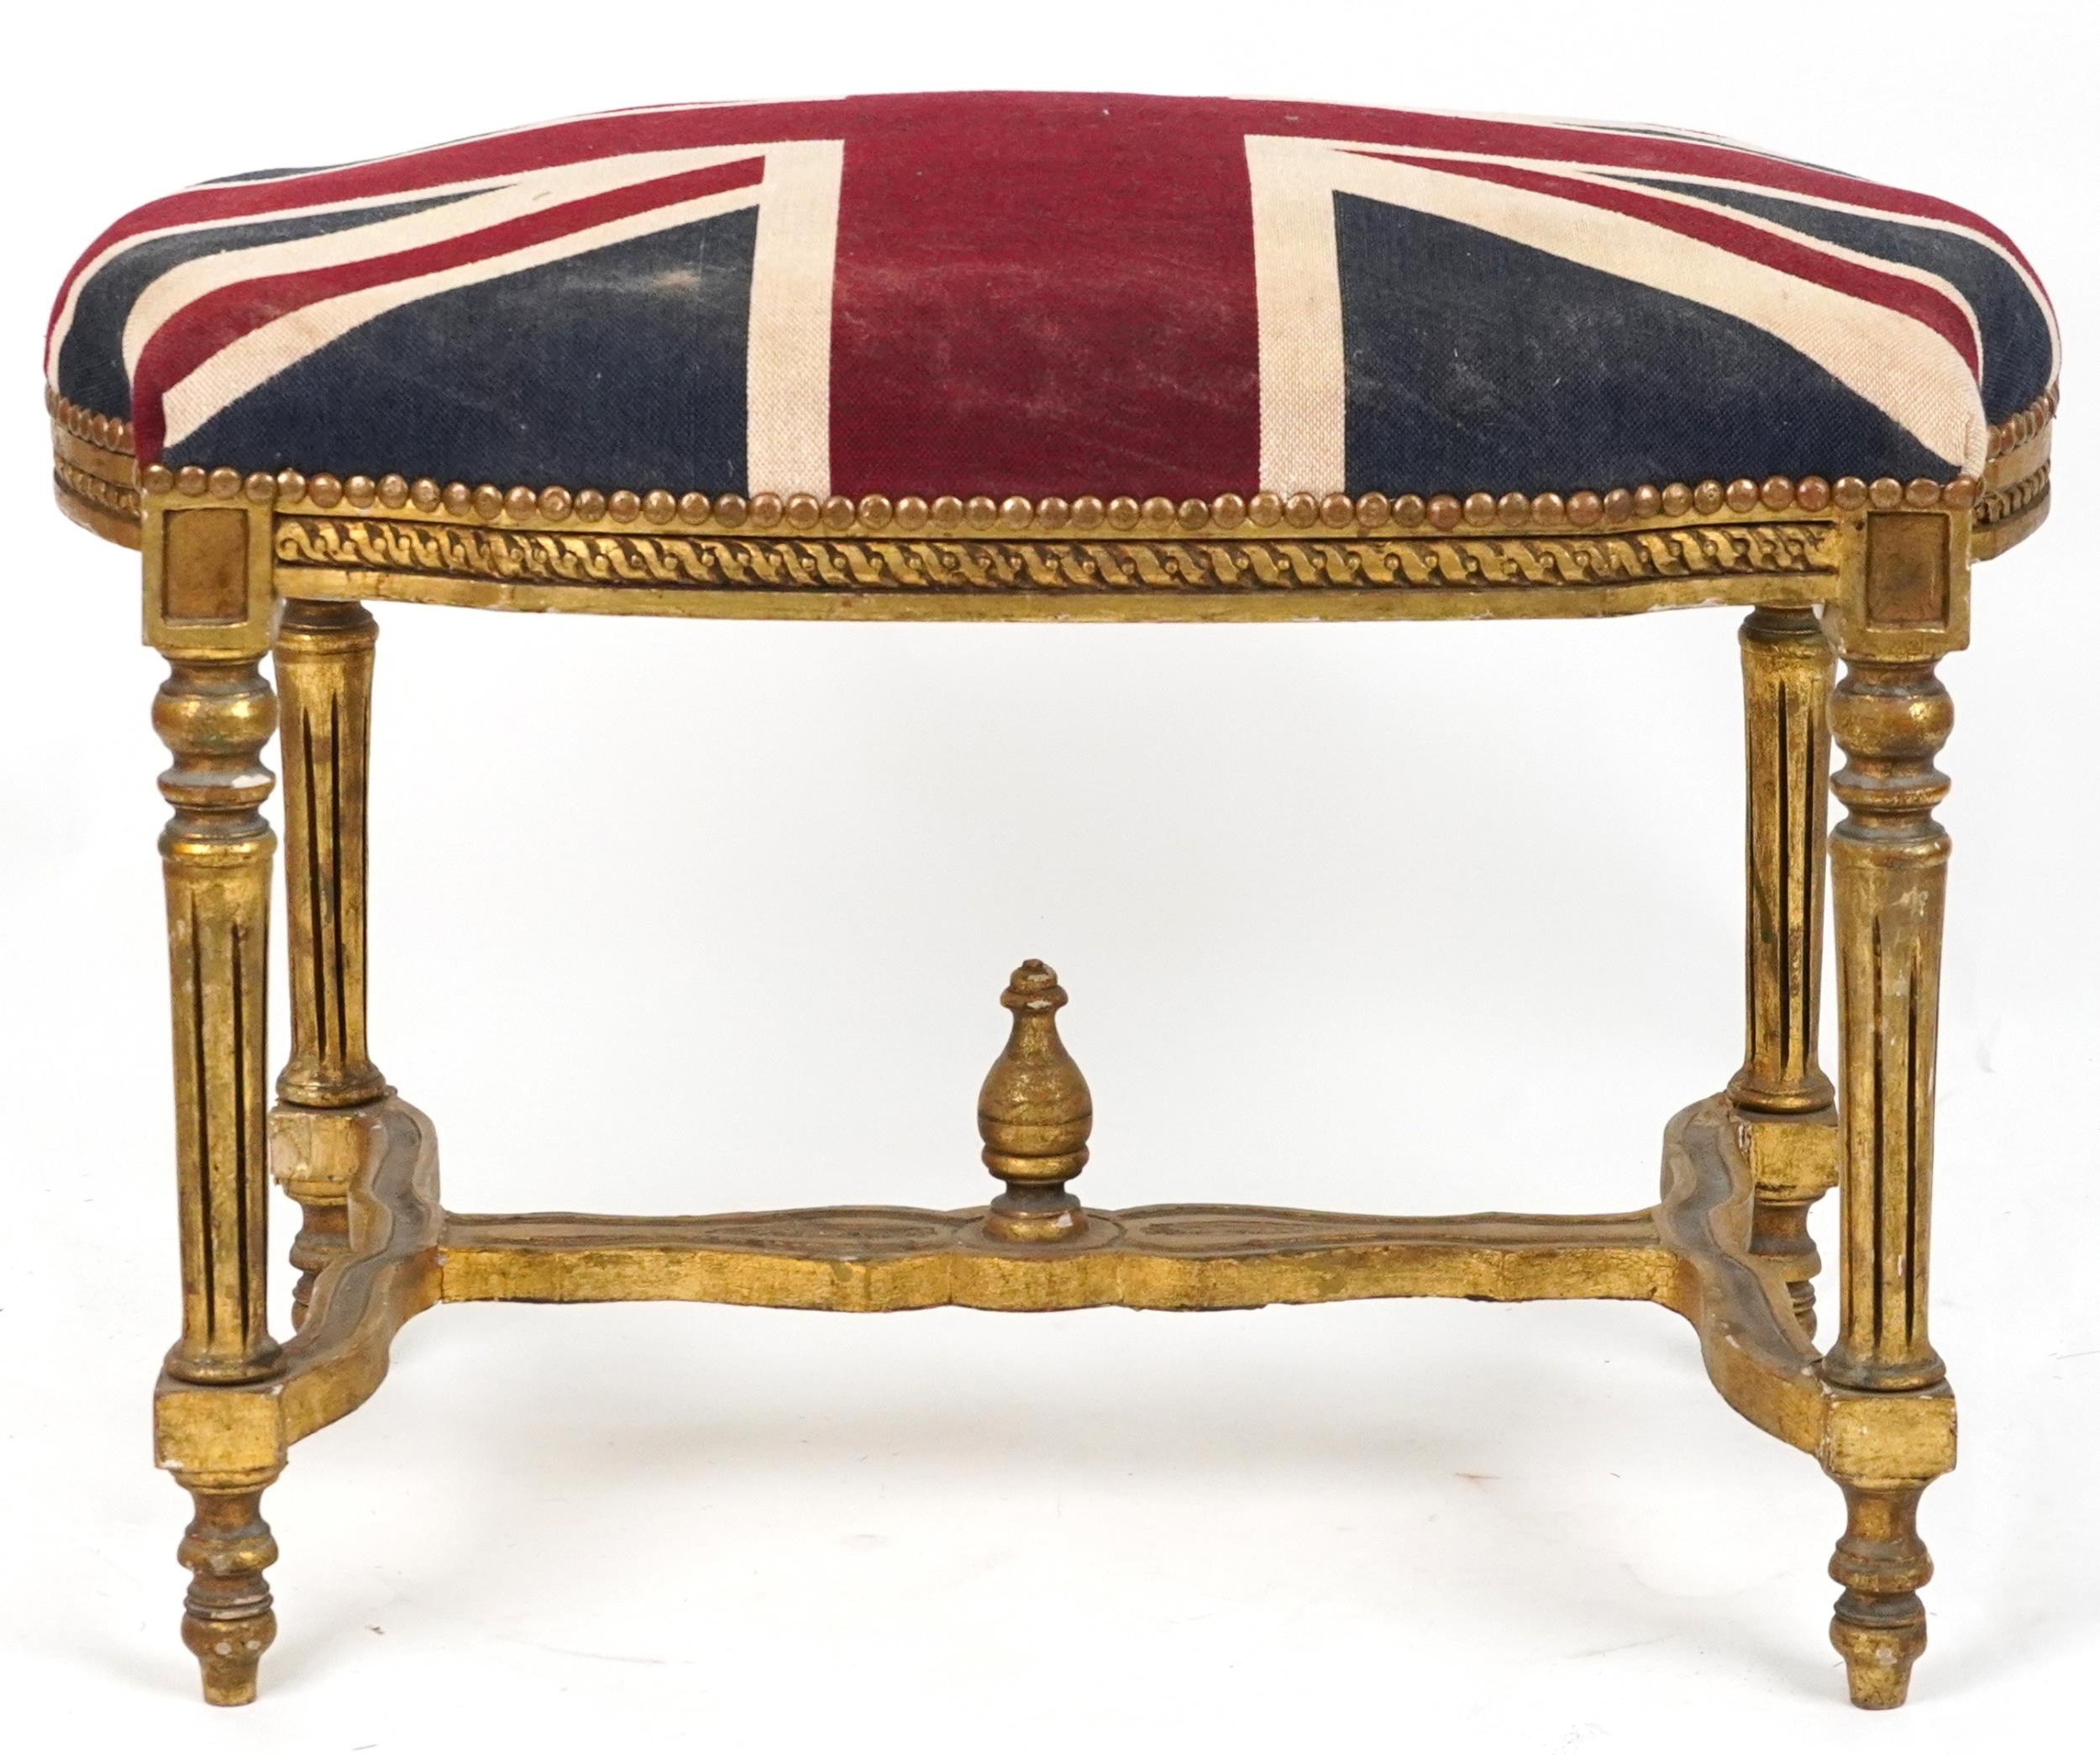 French style gilt stool with H stretcher on reeded legs with Union Jack design cushioned seat, - Image 4 of 4